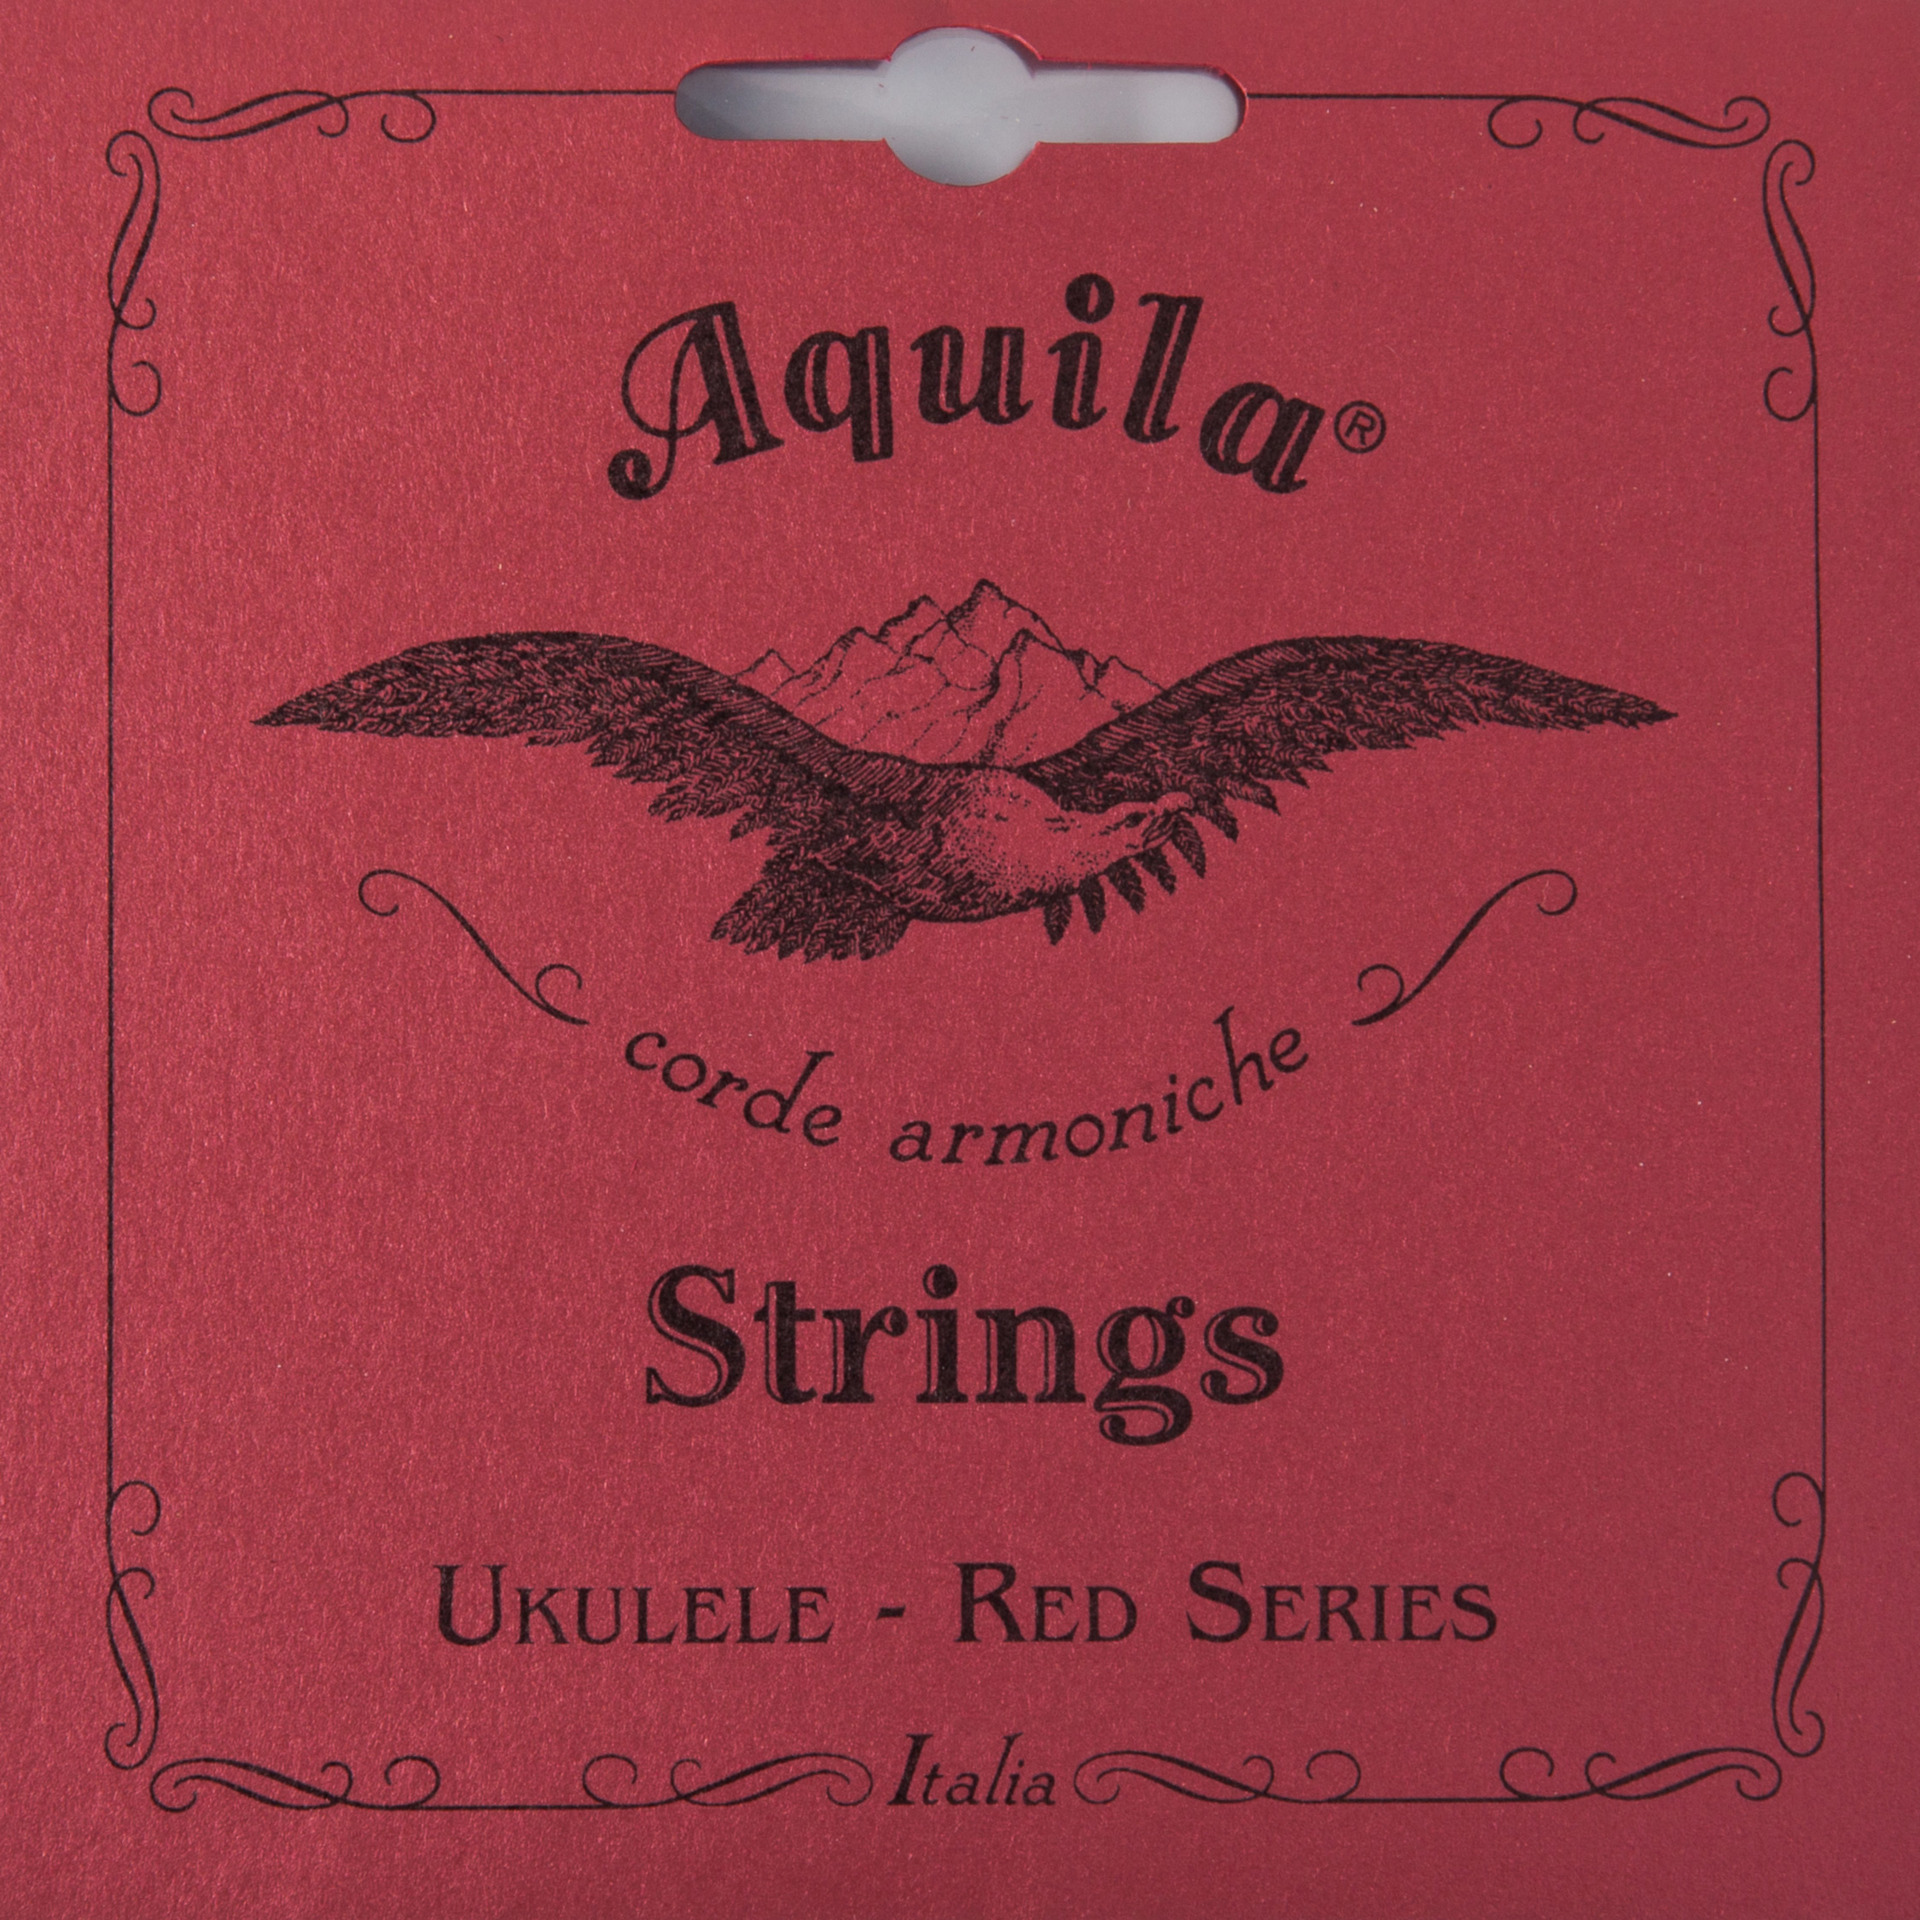 Aquila 135U - Red Series, Ukulele Single String - Concert, Low-G (4th), Wound